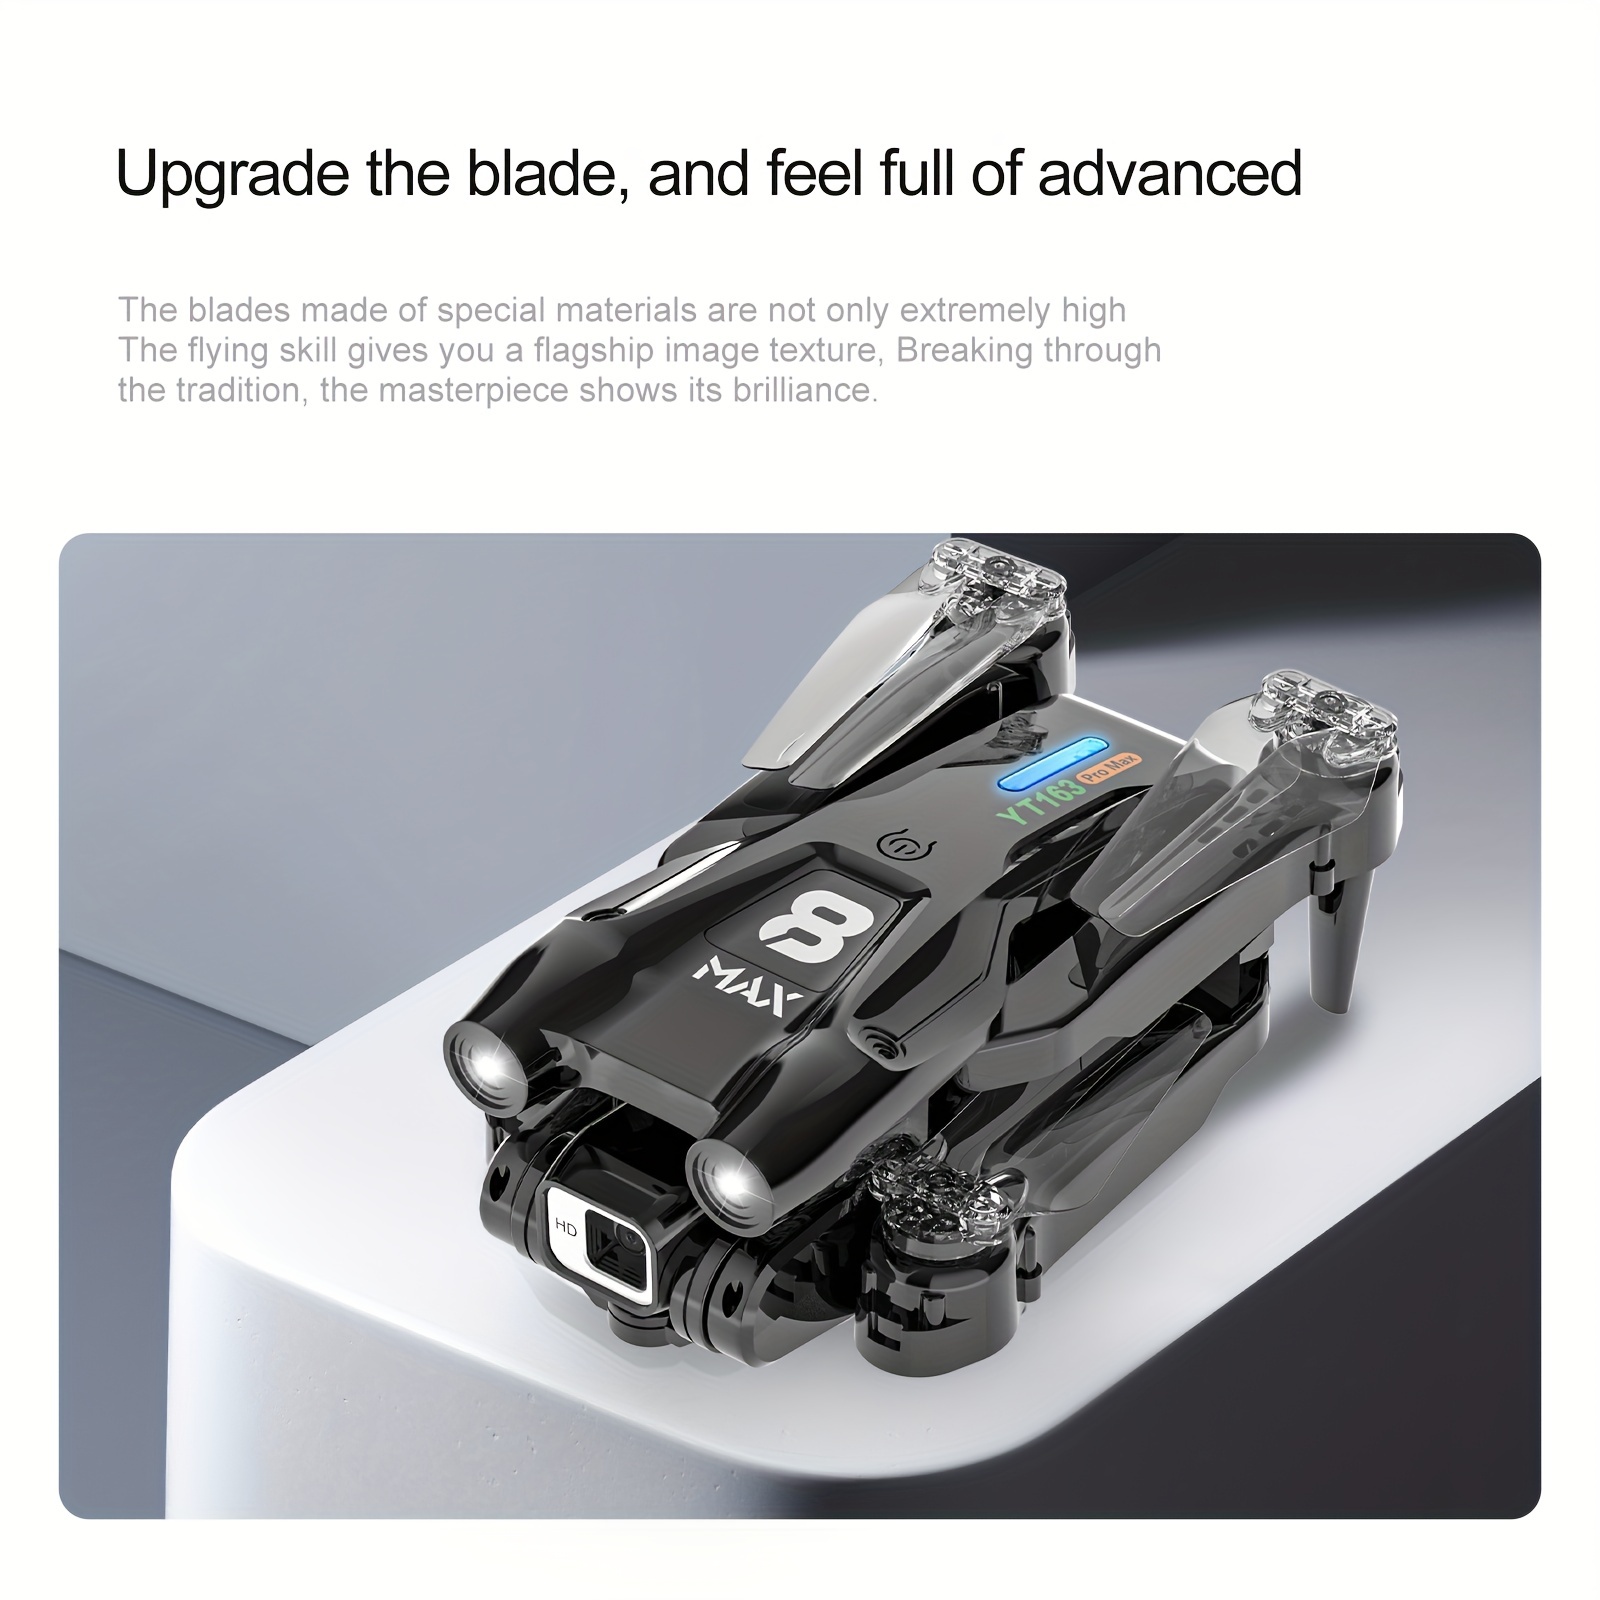 yt163 foldable drone remote control and app control easy to carry four sided sensor obstacle avoidance stable flight one key return high definition camera camera angle adjustable drone details 5